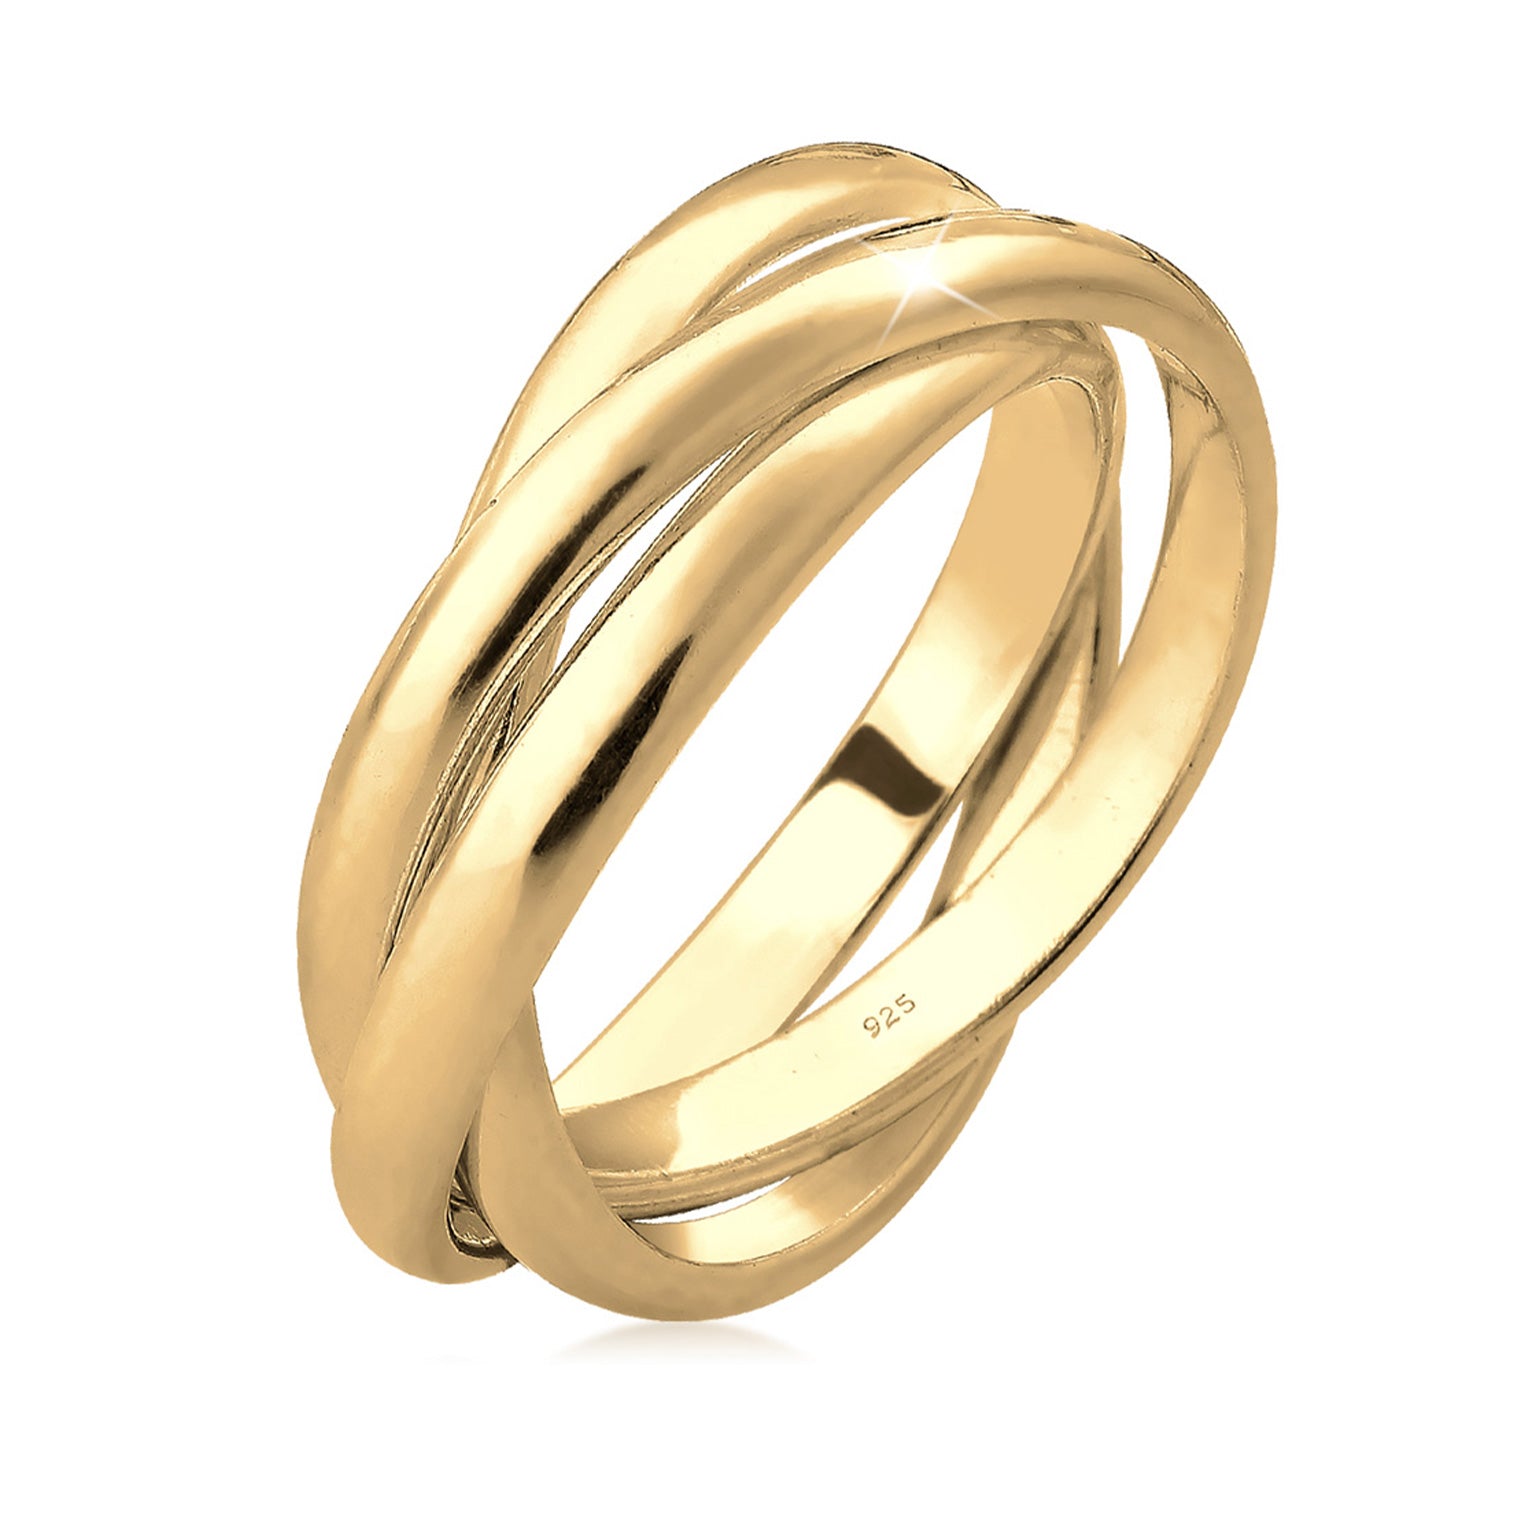 Rings made of silver or gold | buy from Elli | TOP selection – Elli Jewelry